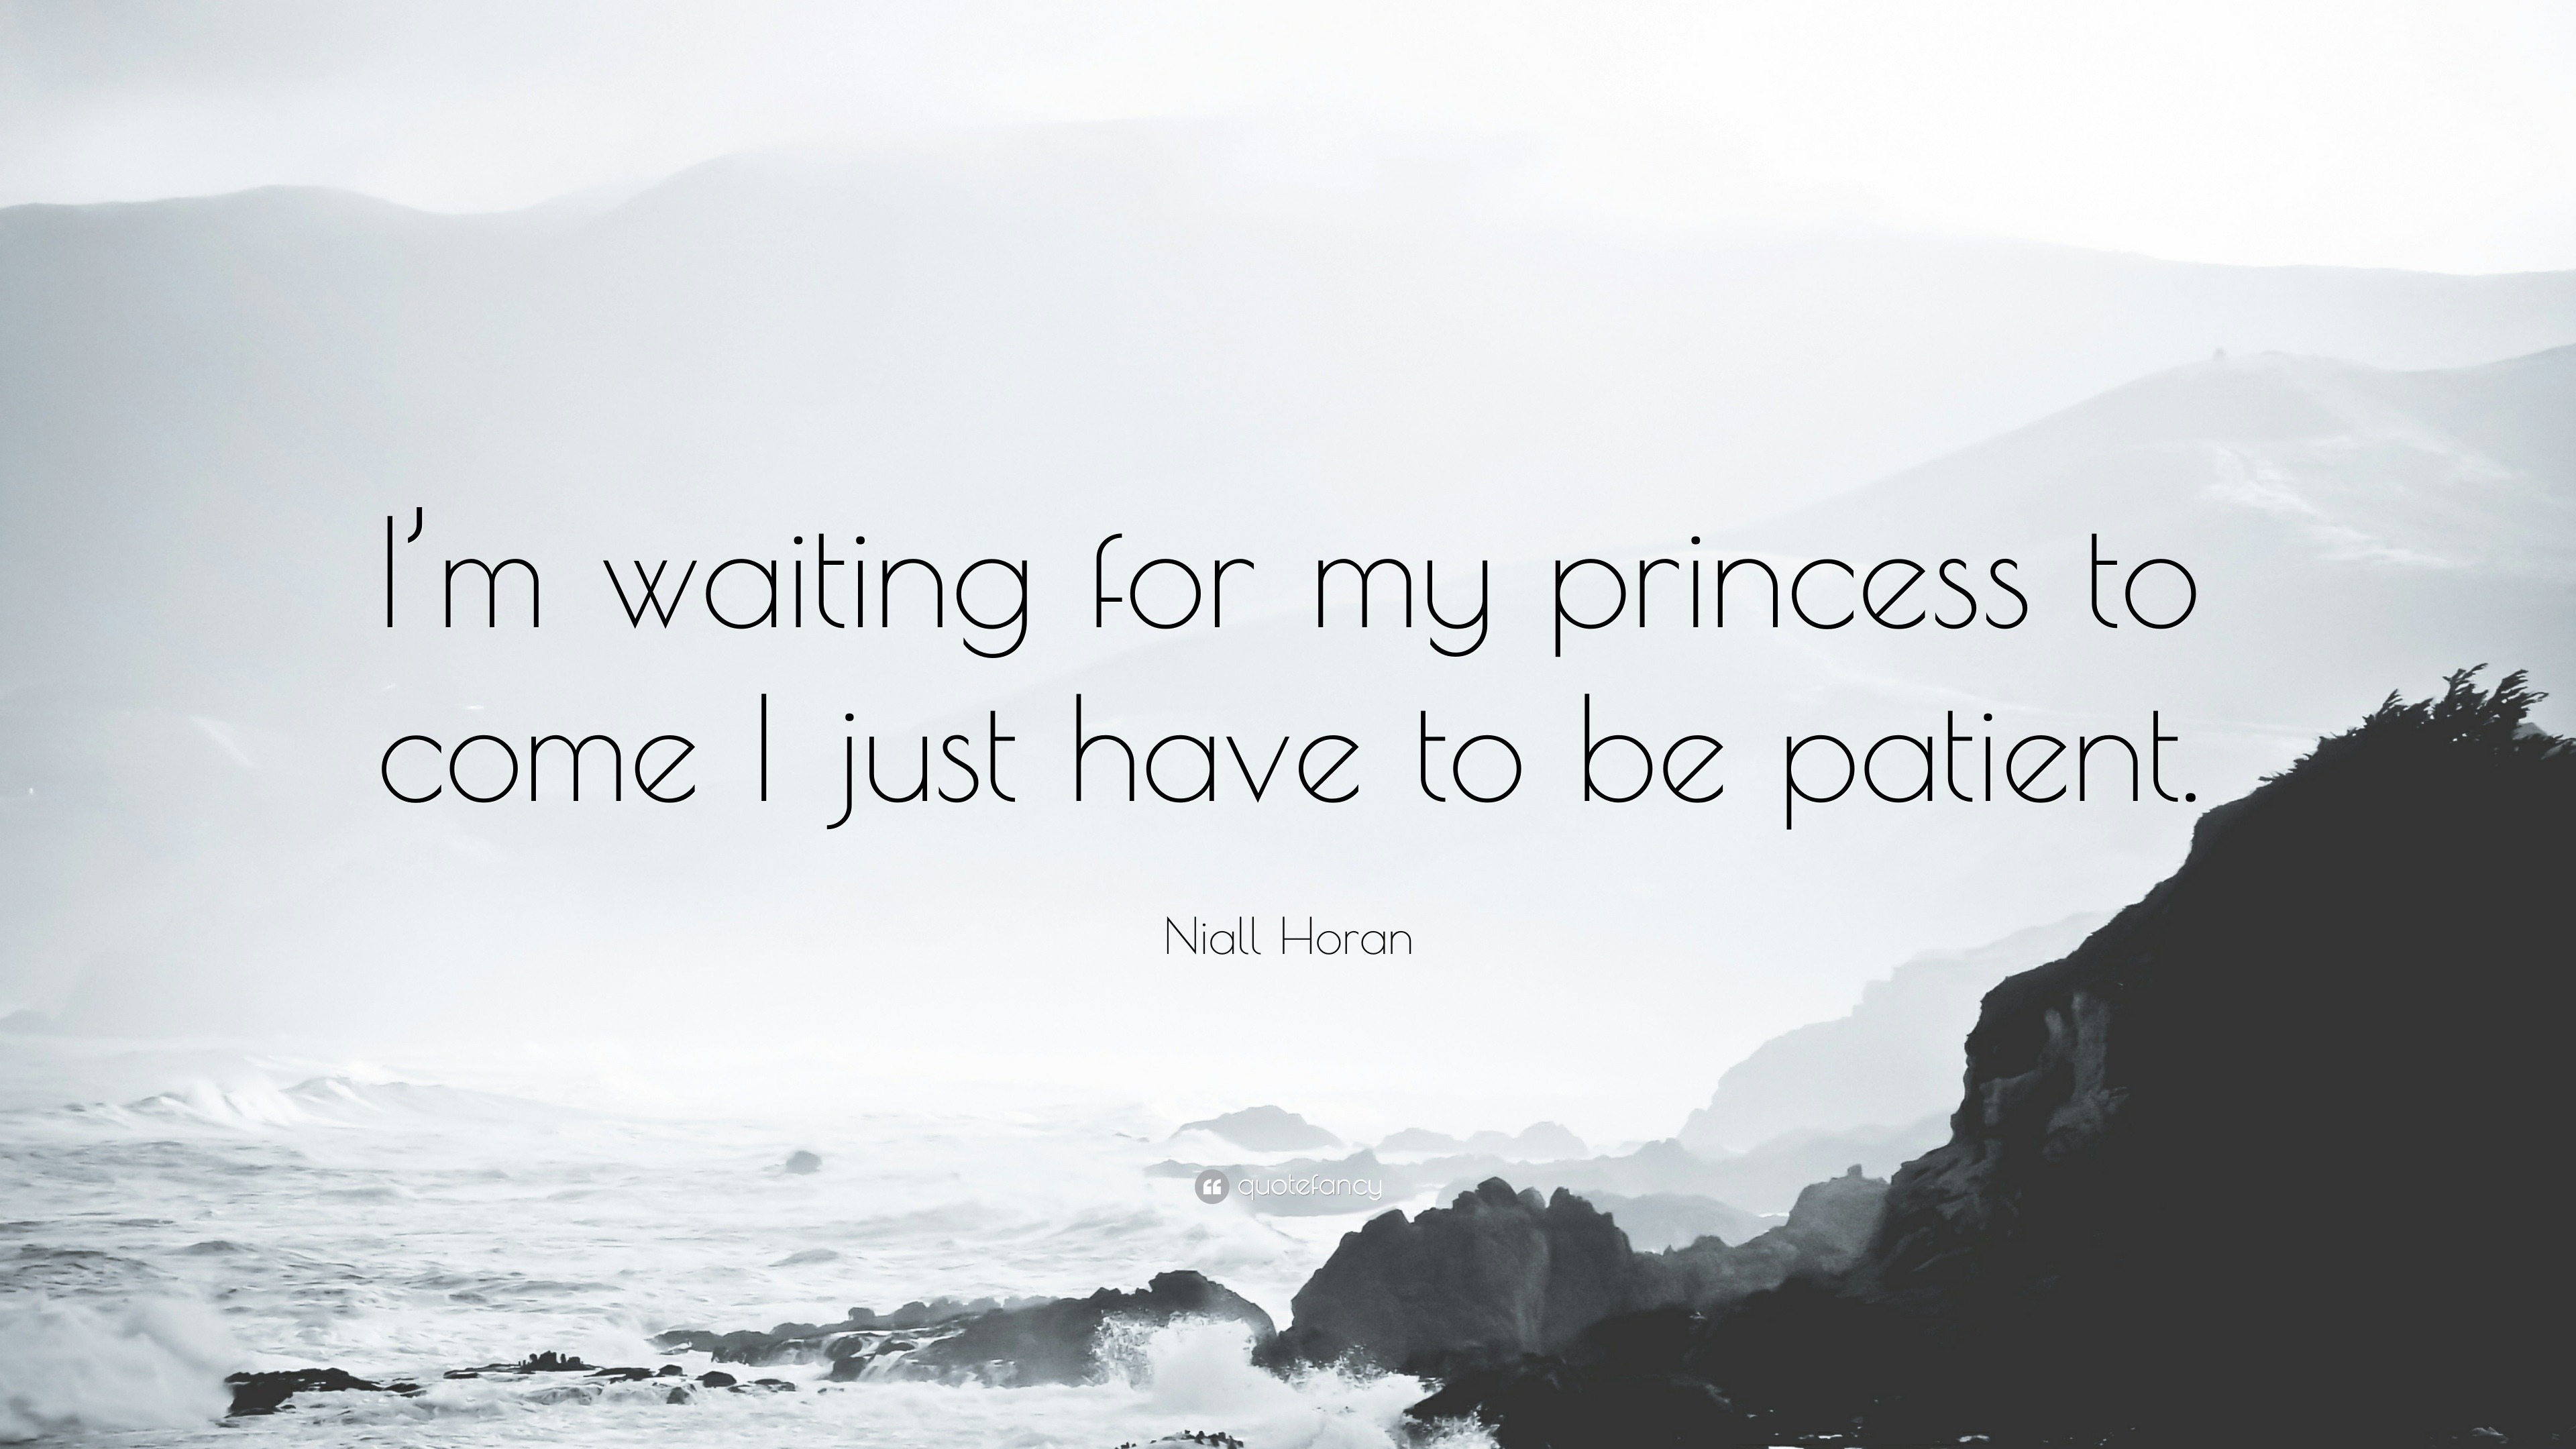 Niall Horan Quote: “I'm waiting for my princess to come I just have to be